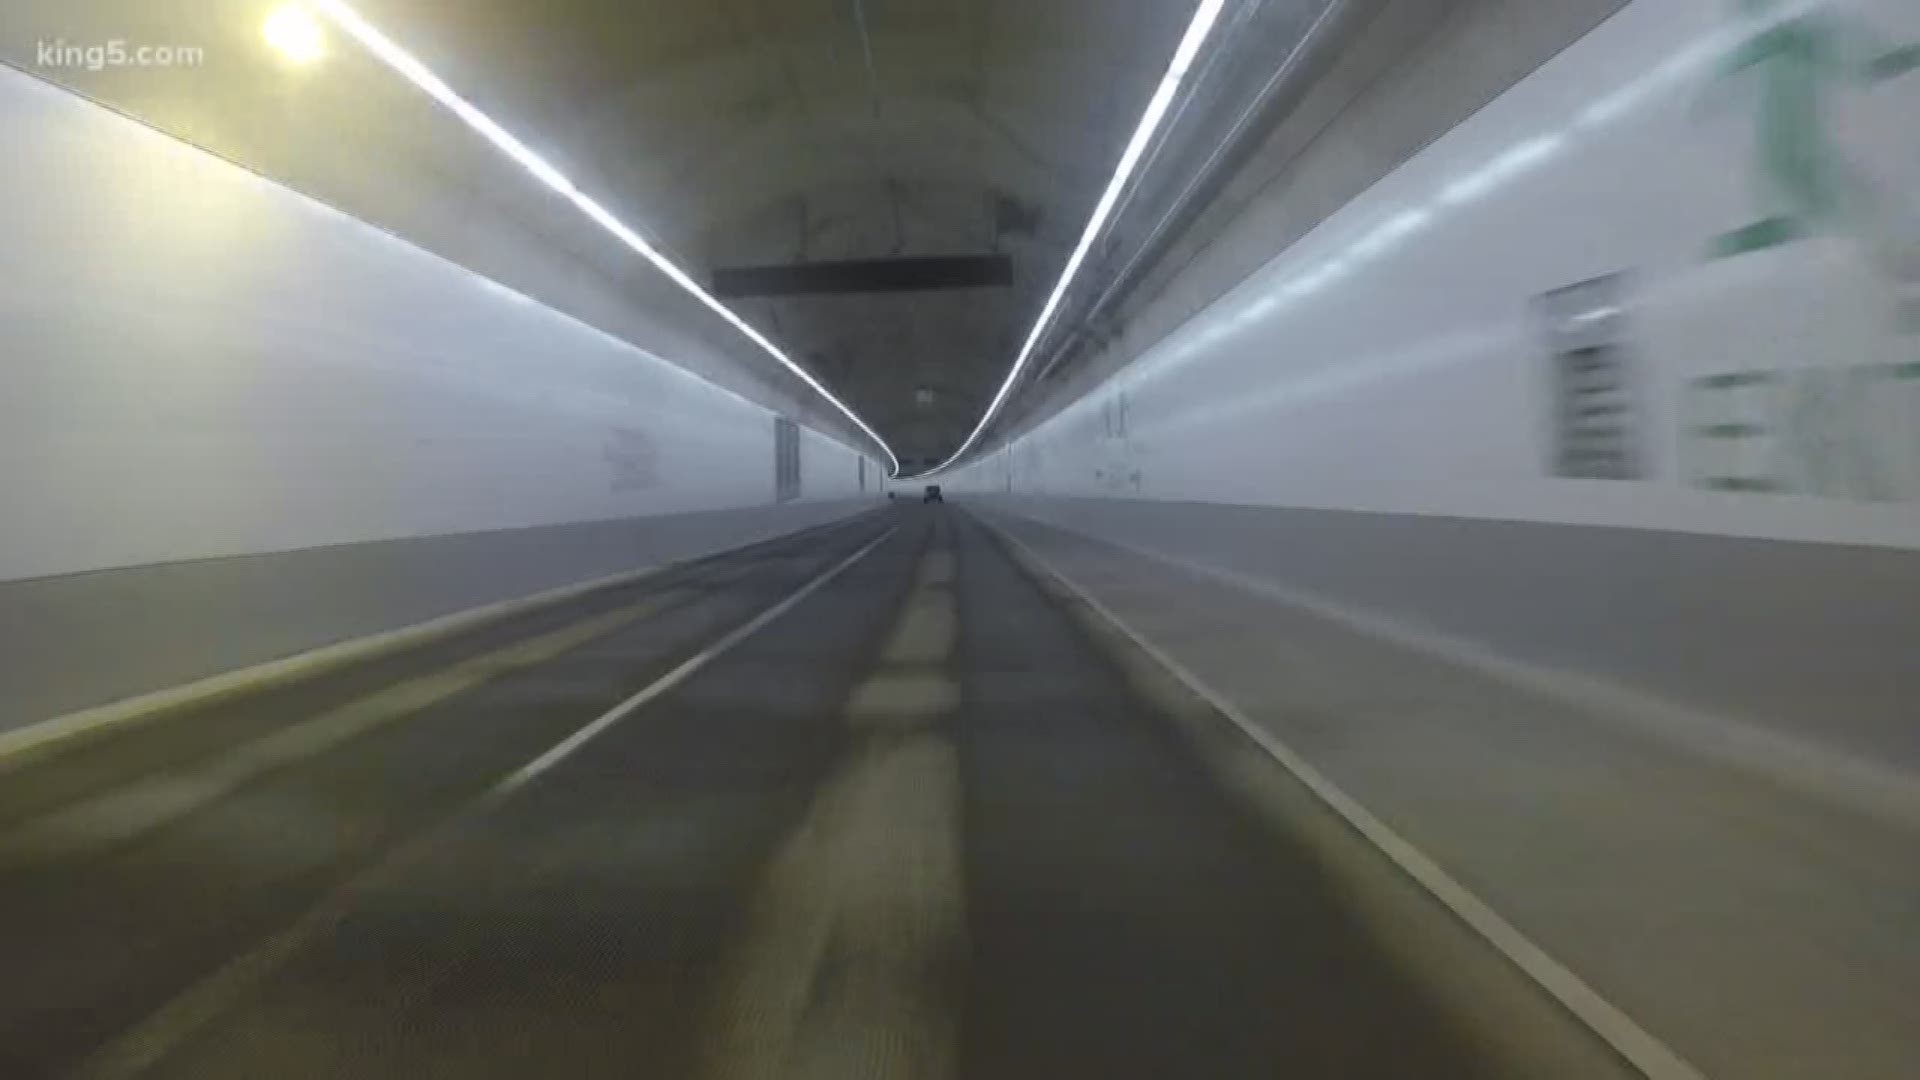 The first day to drive through Seattle's new Highway 99 Tunnel was a little slow due to the snow in western Washington. KING 5's Glenn Farley reports.